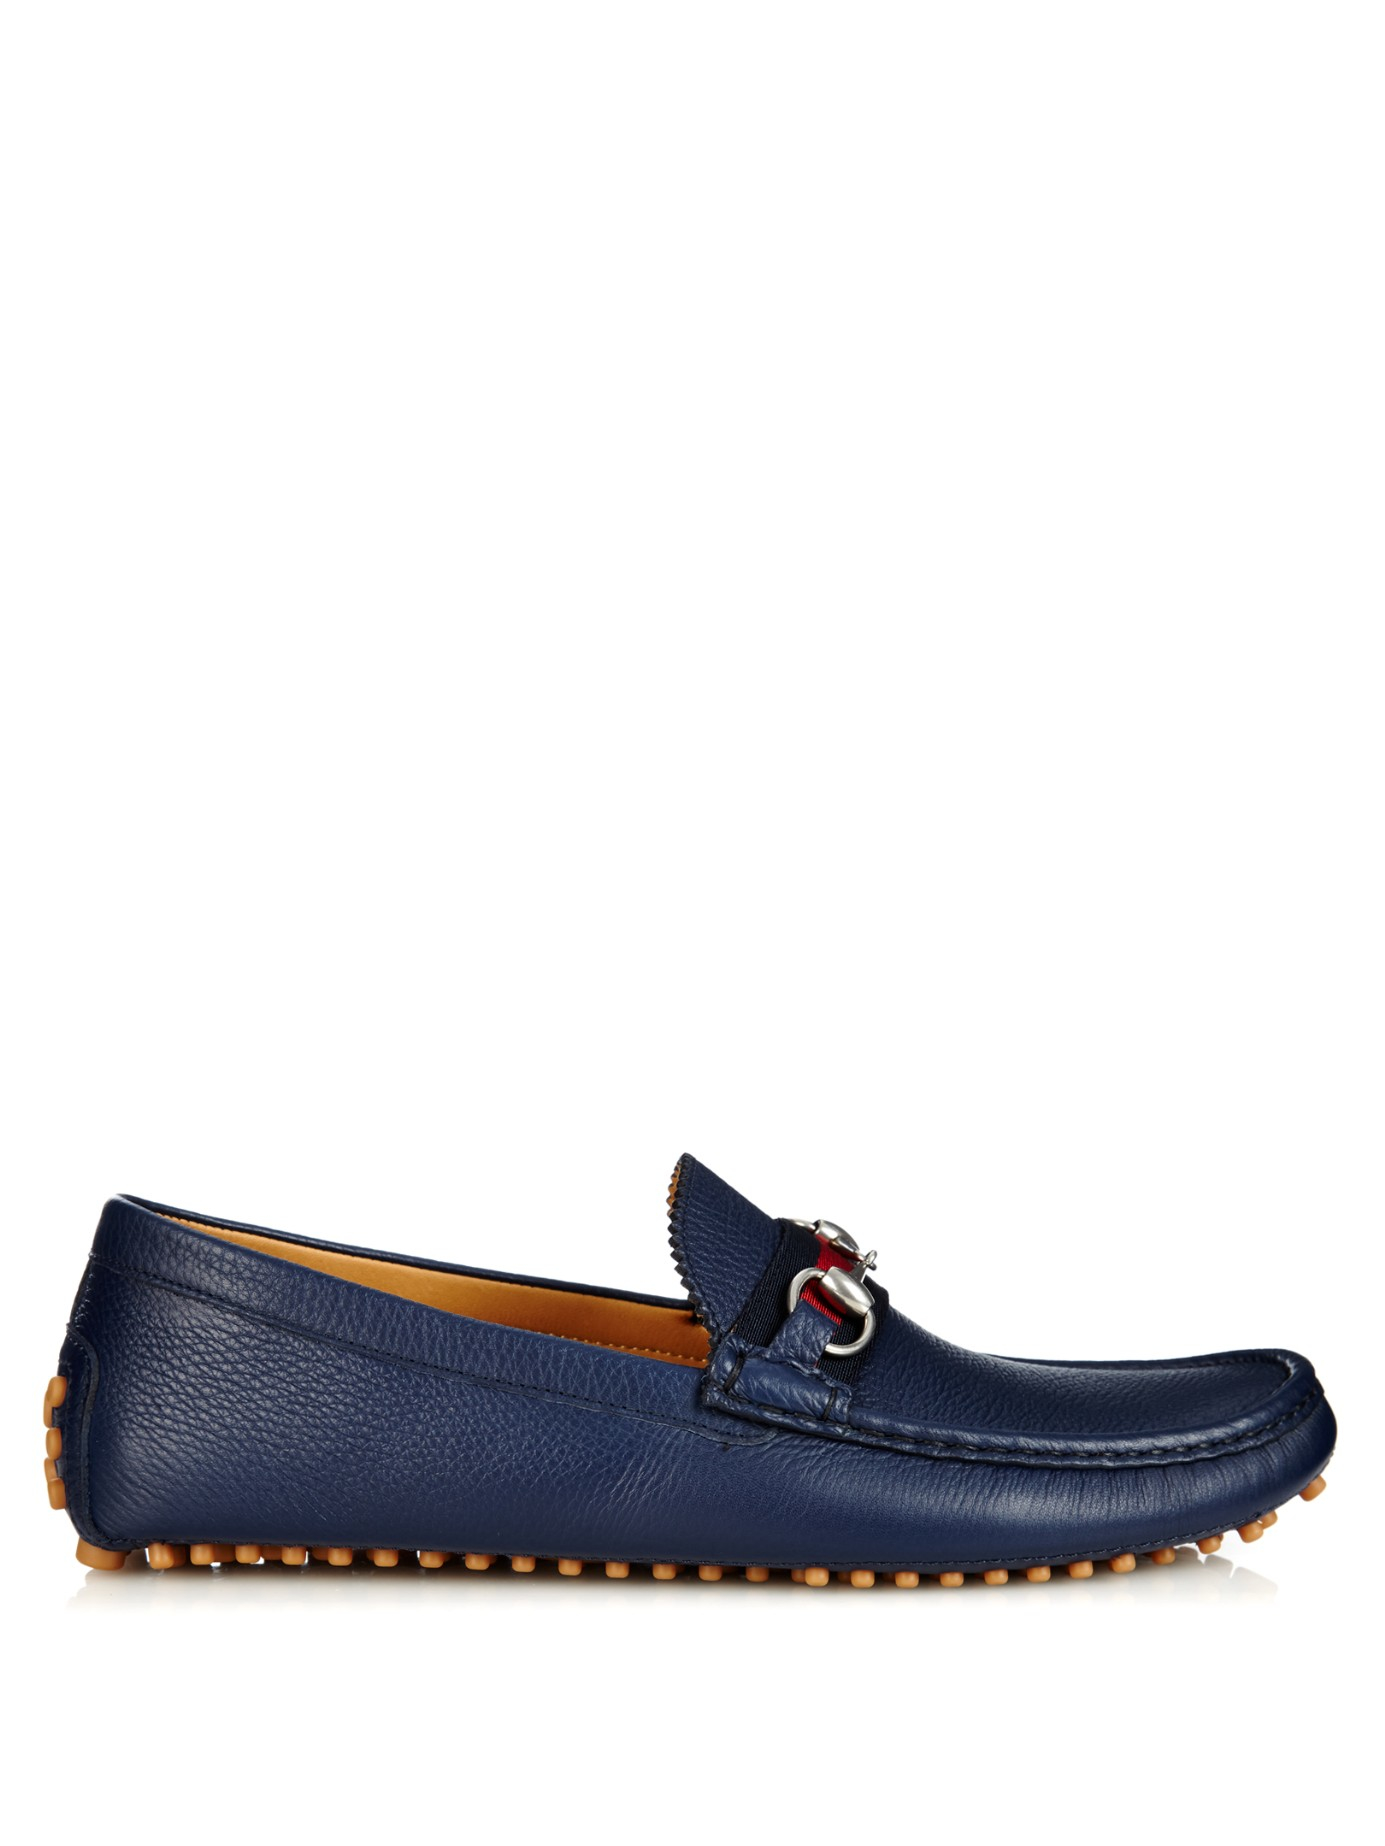 navy blue gucci loafers